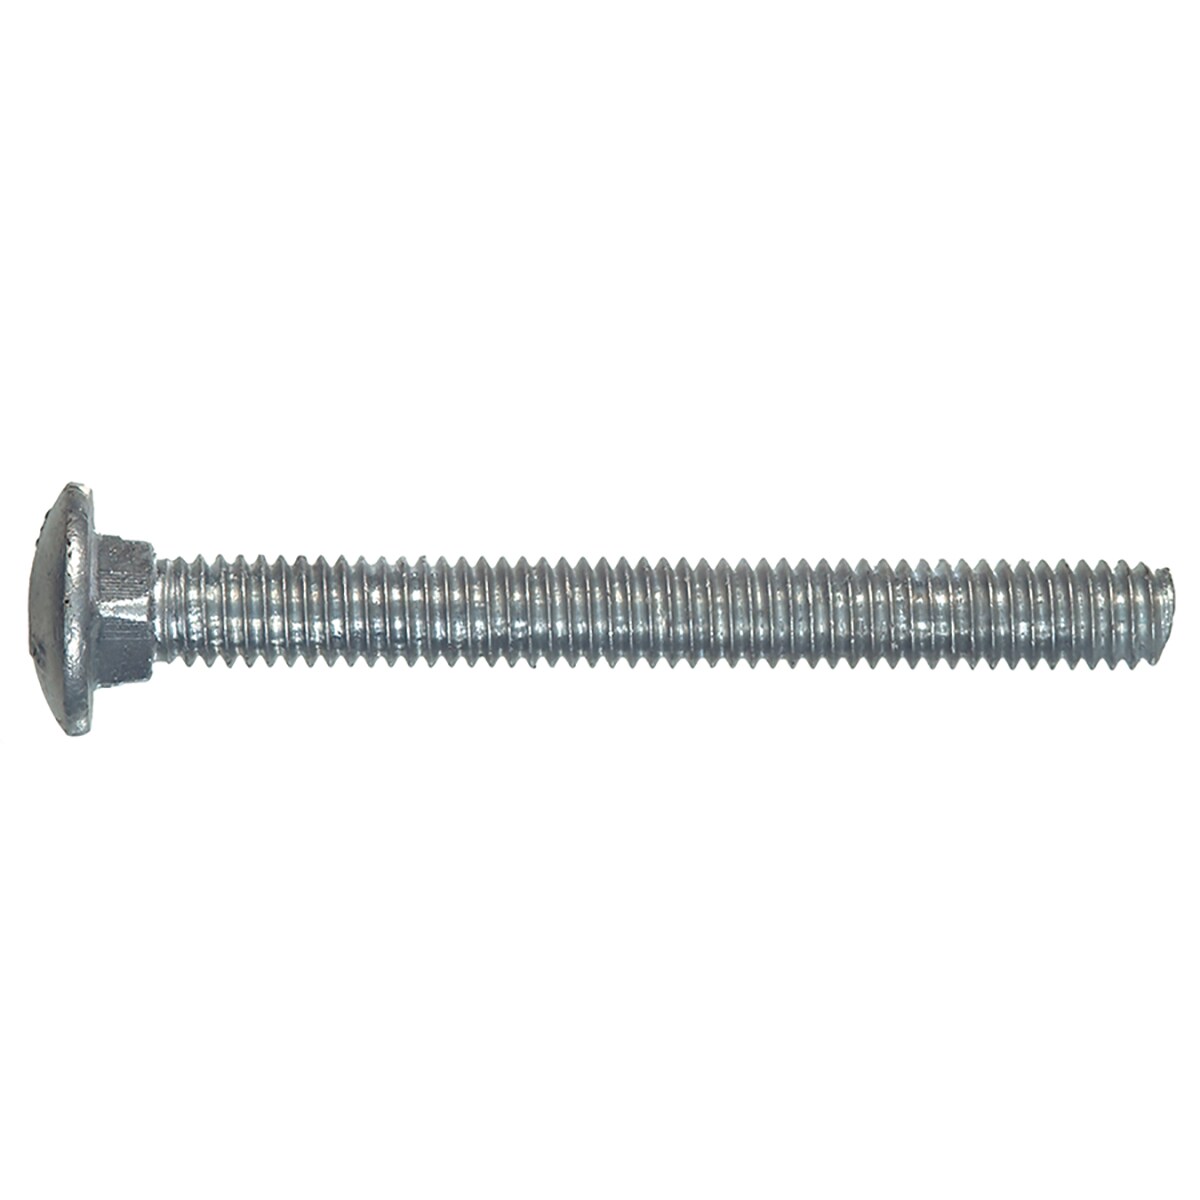 3/8-16 x 3-1/2 Carriage Bolts Hot Dipped Galvanized 25 